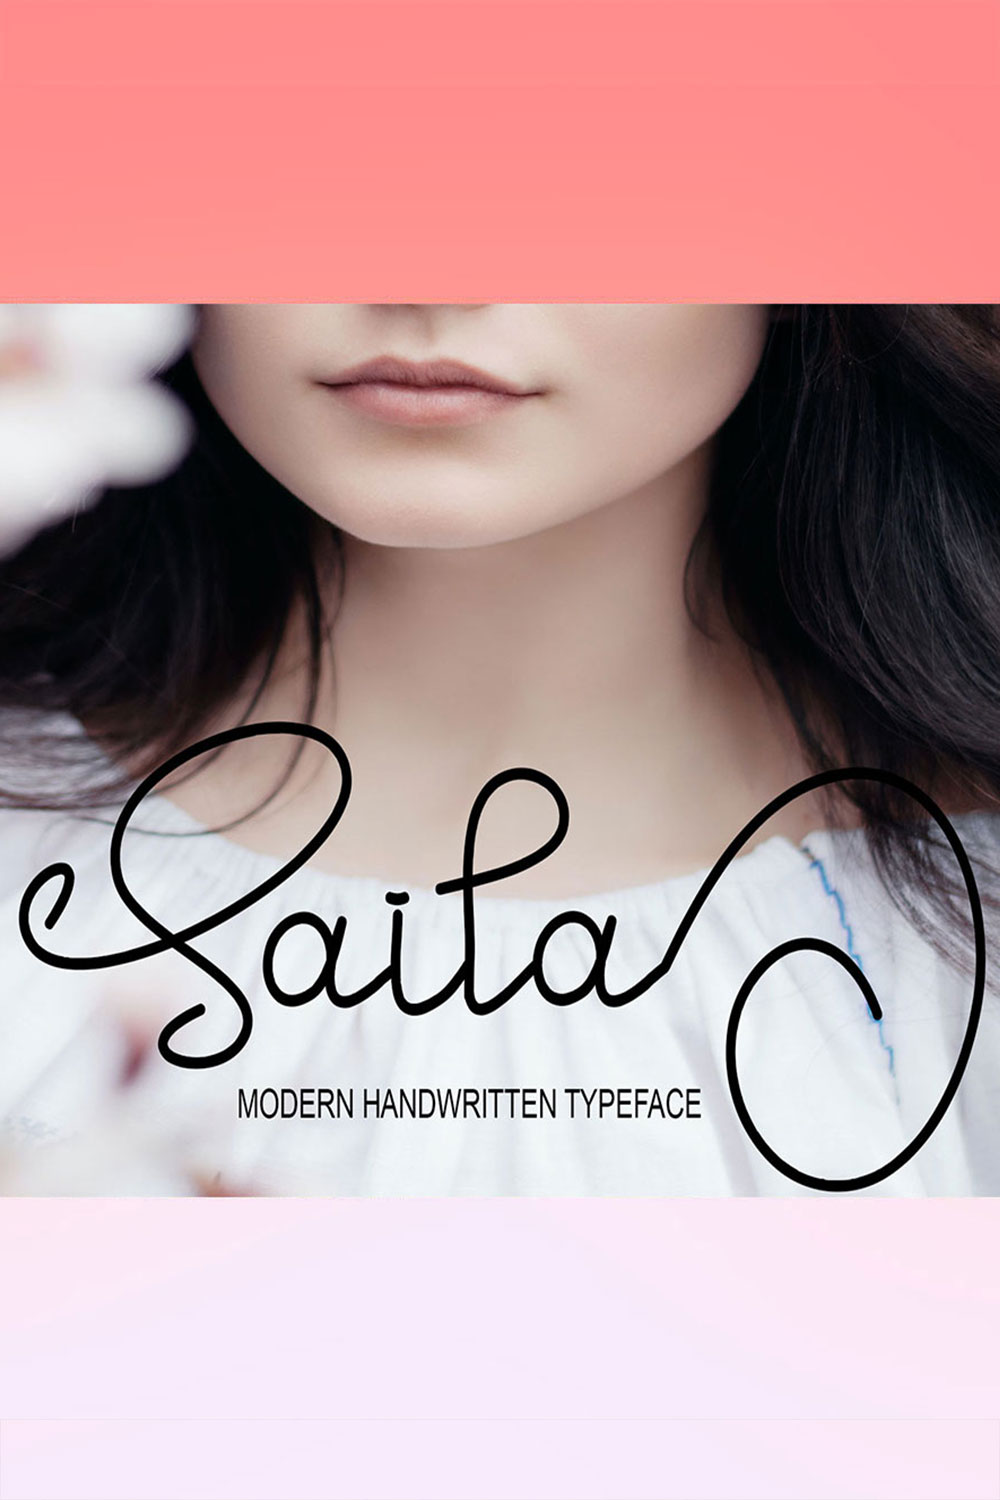 Saila-only$5 pinterest preview image.